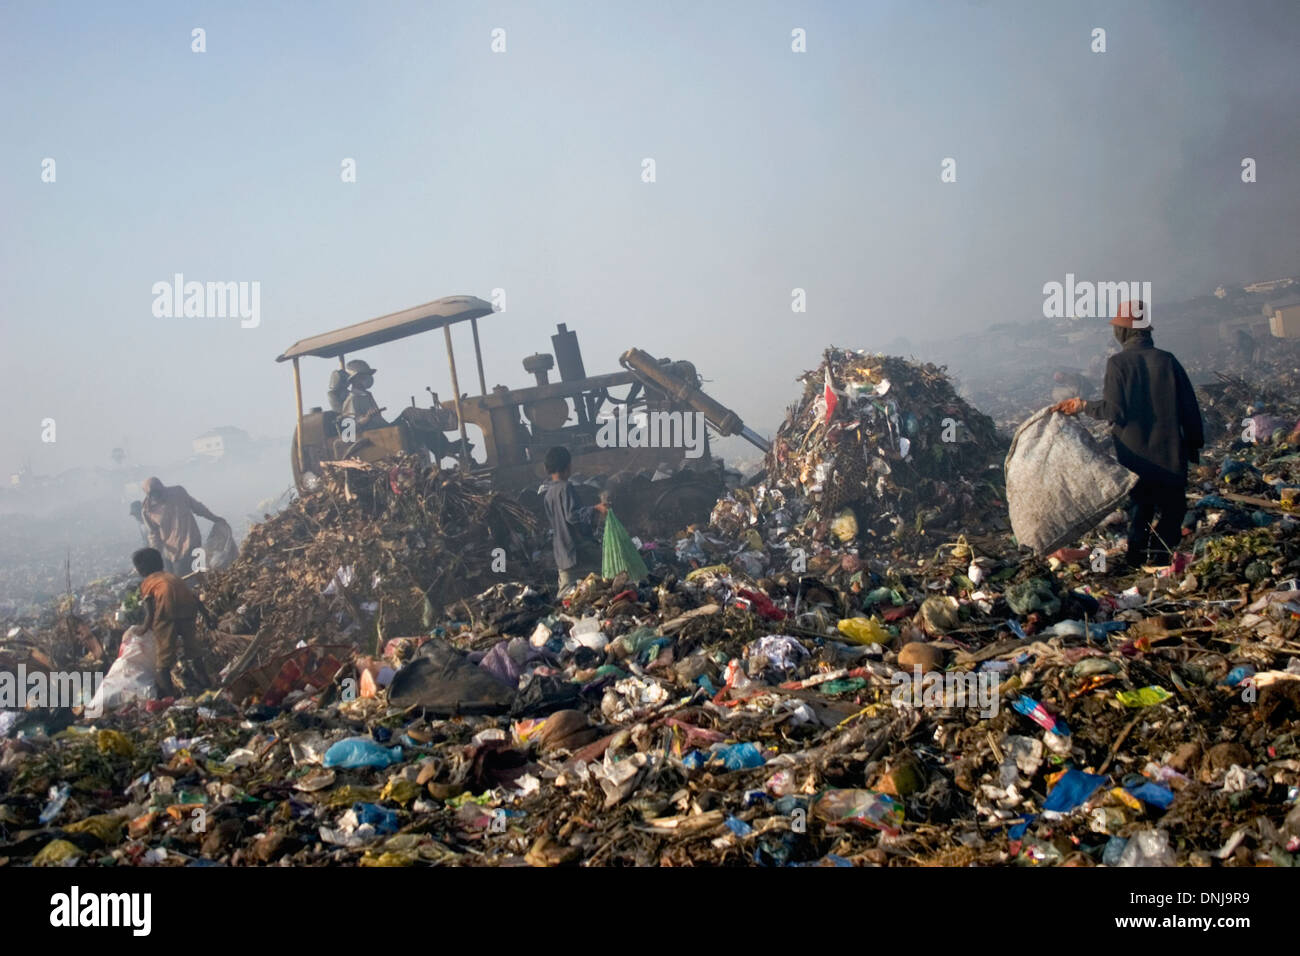 Scavengers are collecting recyclable material at the Stung Meanchey Landfill in Phnom Penh, Cambodia. Stock Photo